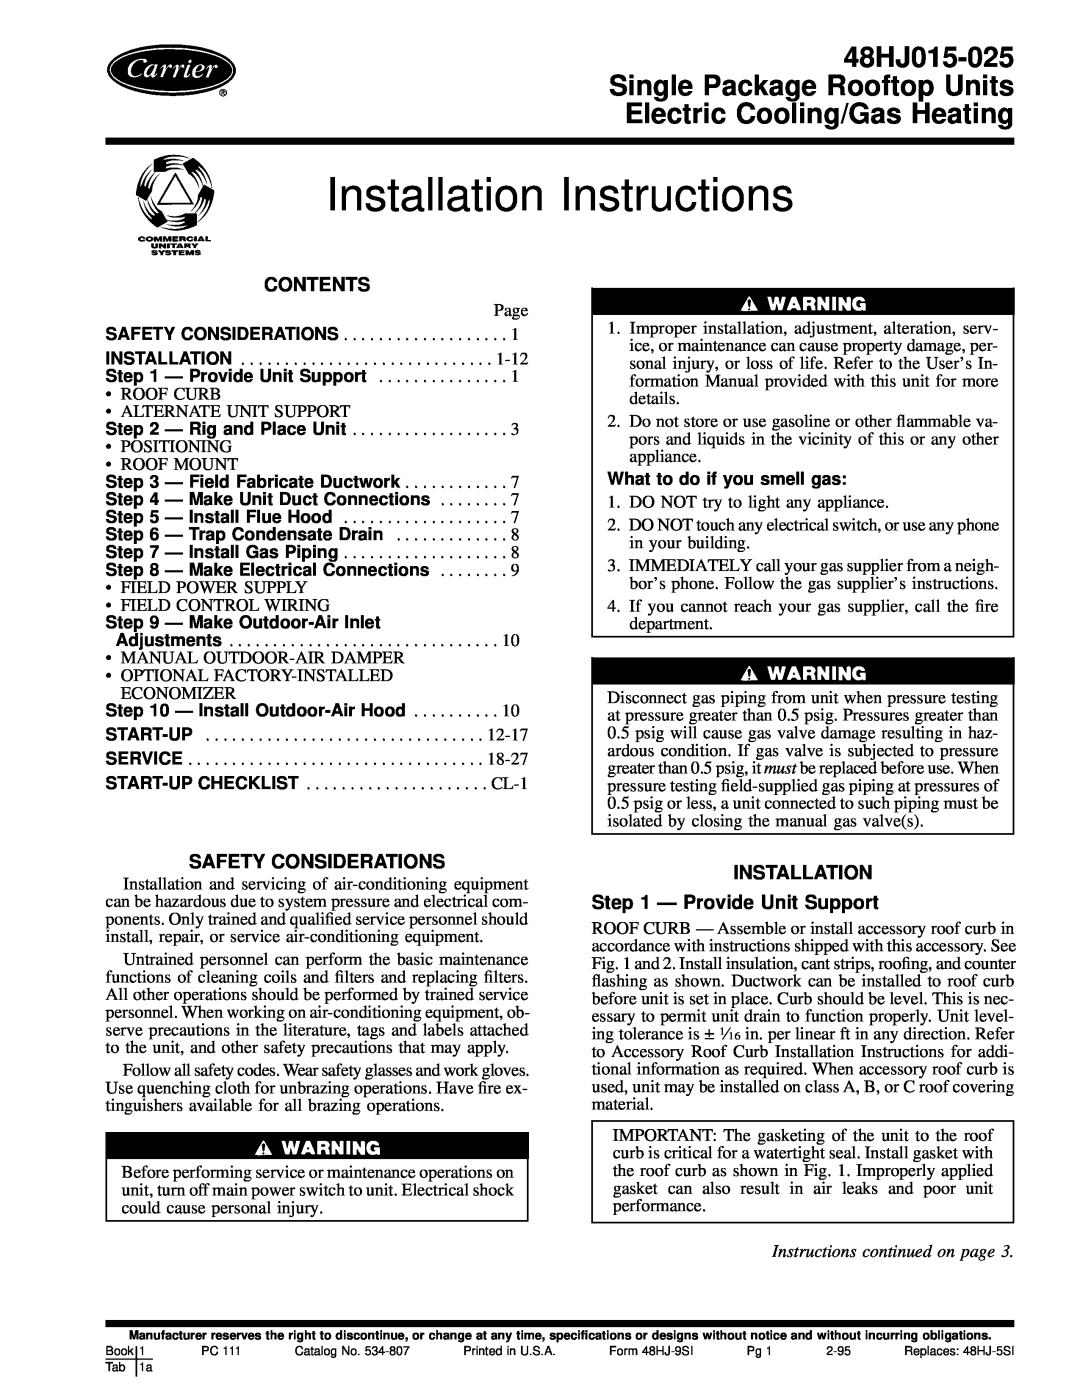 Carrier 48HJ015-025 installation instructions Installation Instructions, Contents, Safety Considerations 